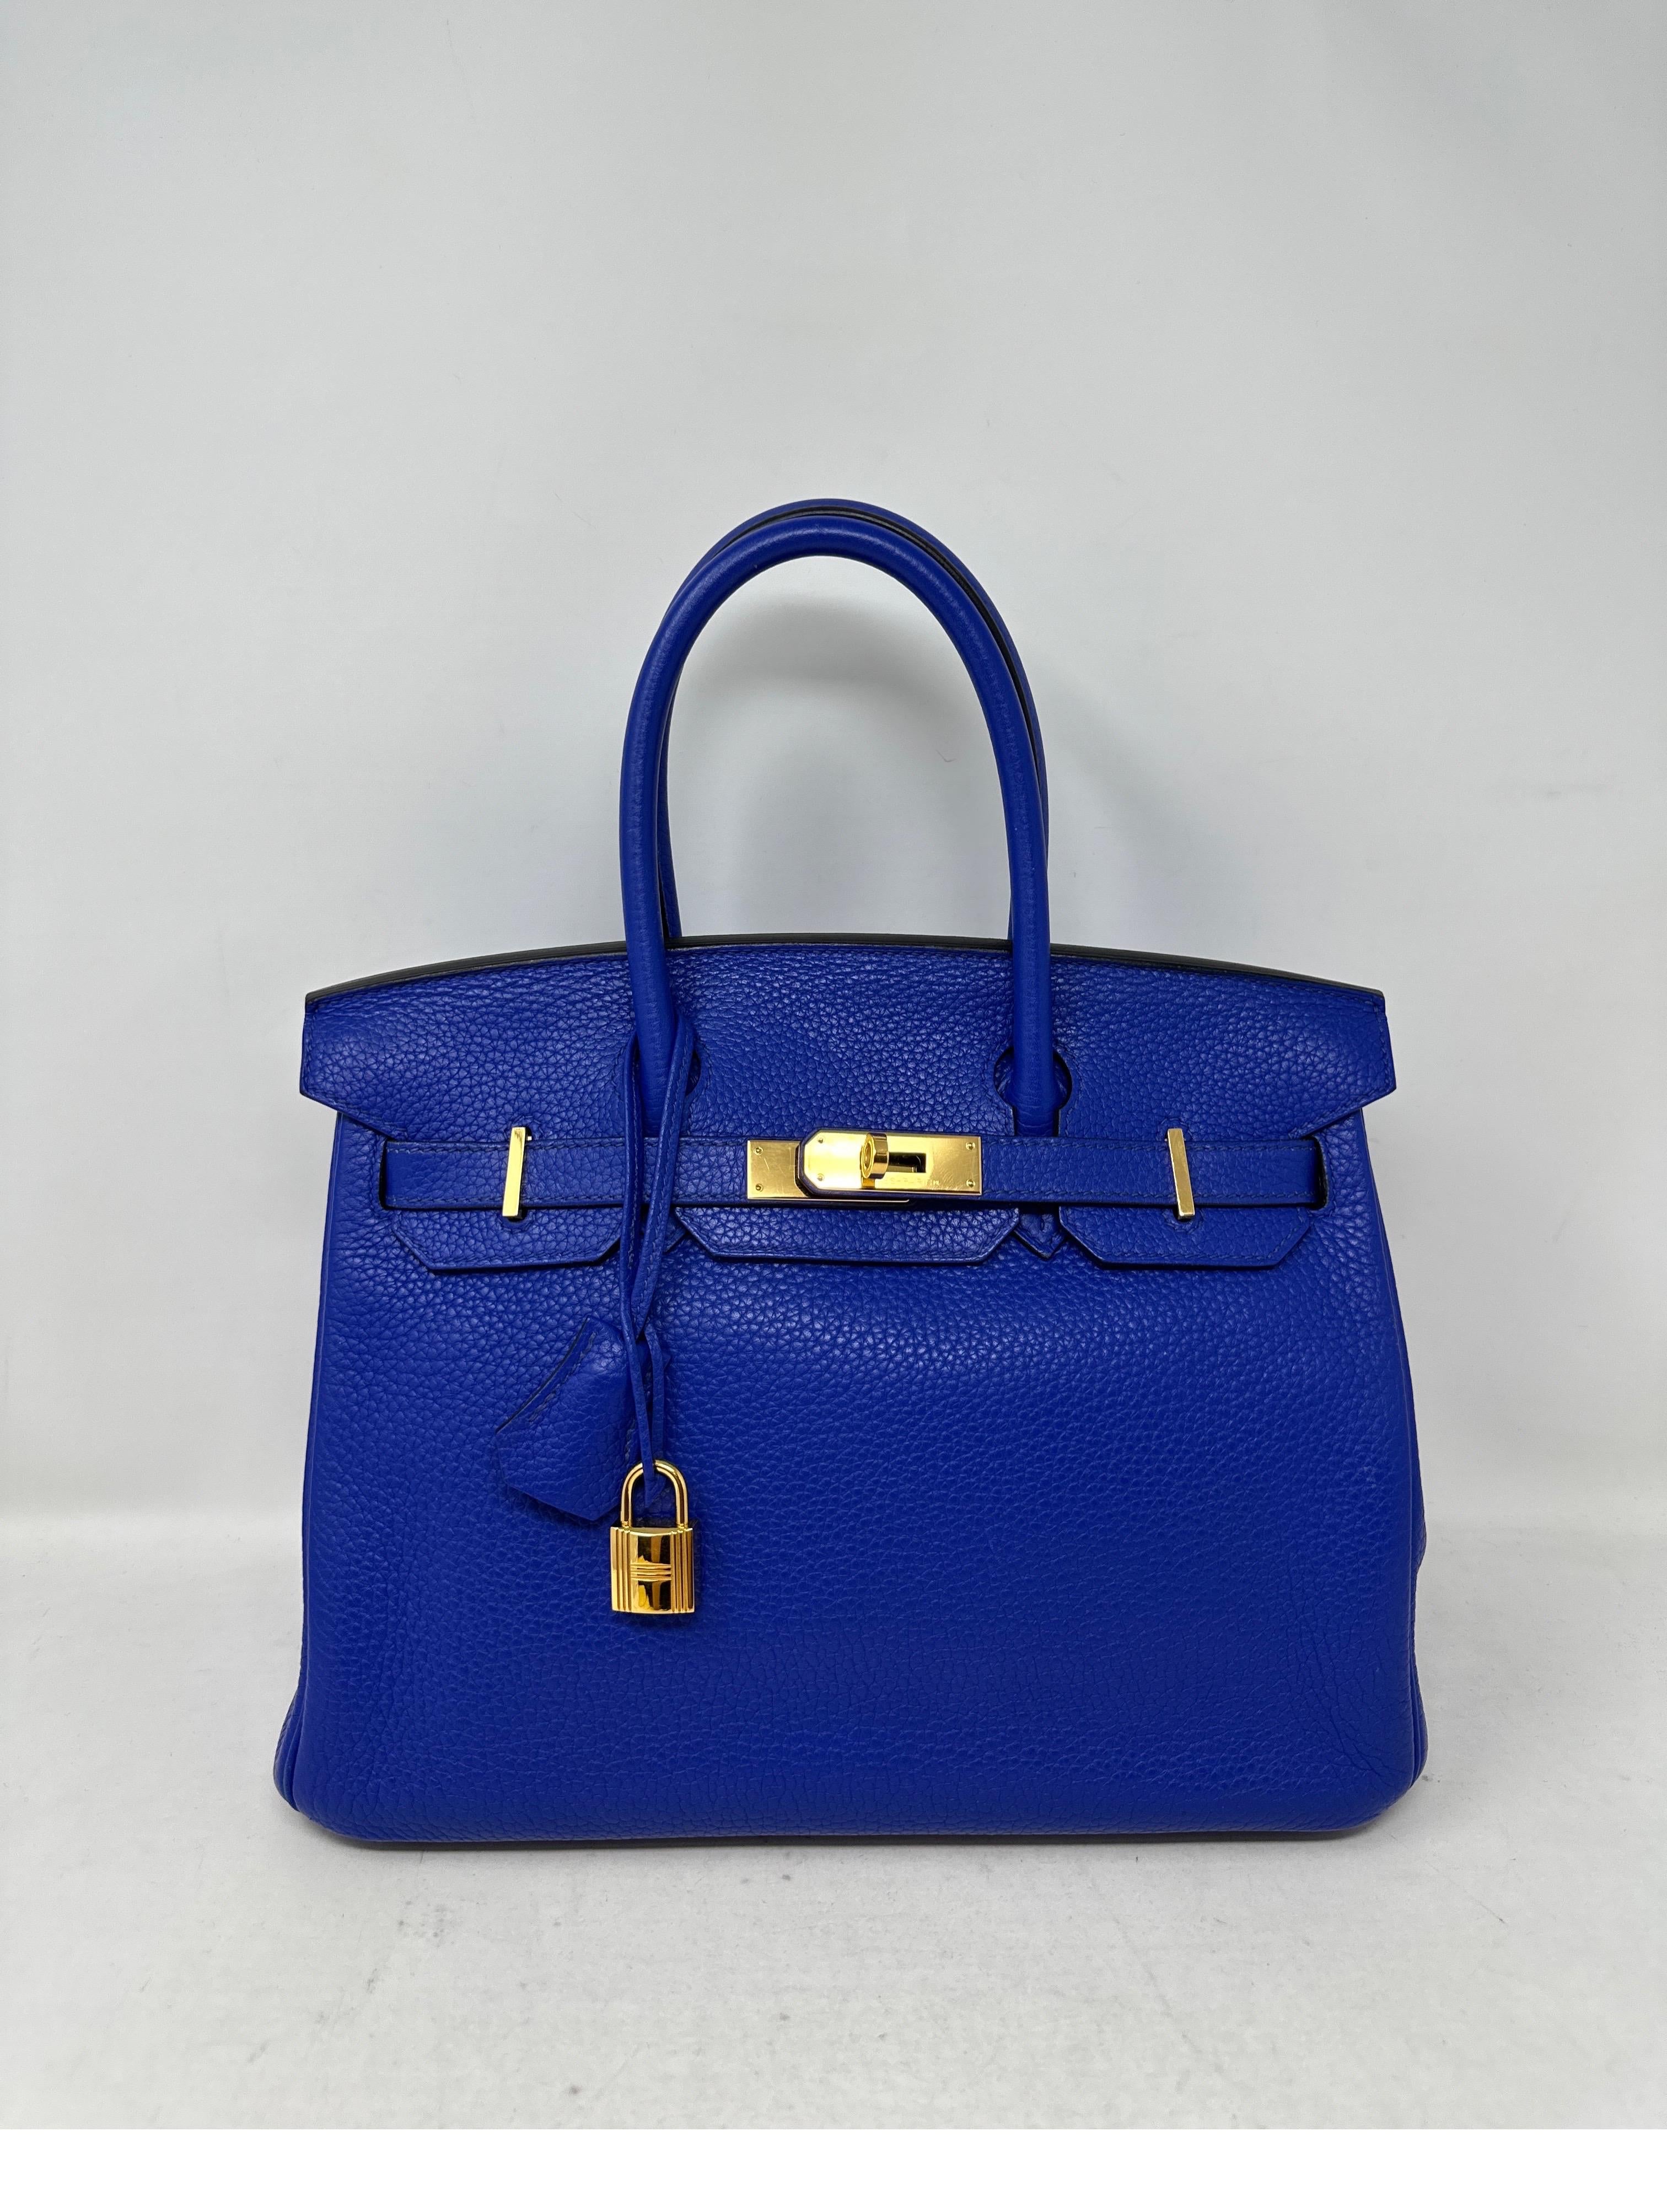 Hermes Blue Electrique Birkin 30 Bag. Excellent condition. Clemence leather. Gold hardware. Vibrant blue color. Most wanted size 30. Interior clean. Includes clochette, lock, keys, and dust bag. Guaranteed authentic. 